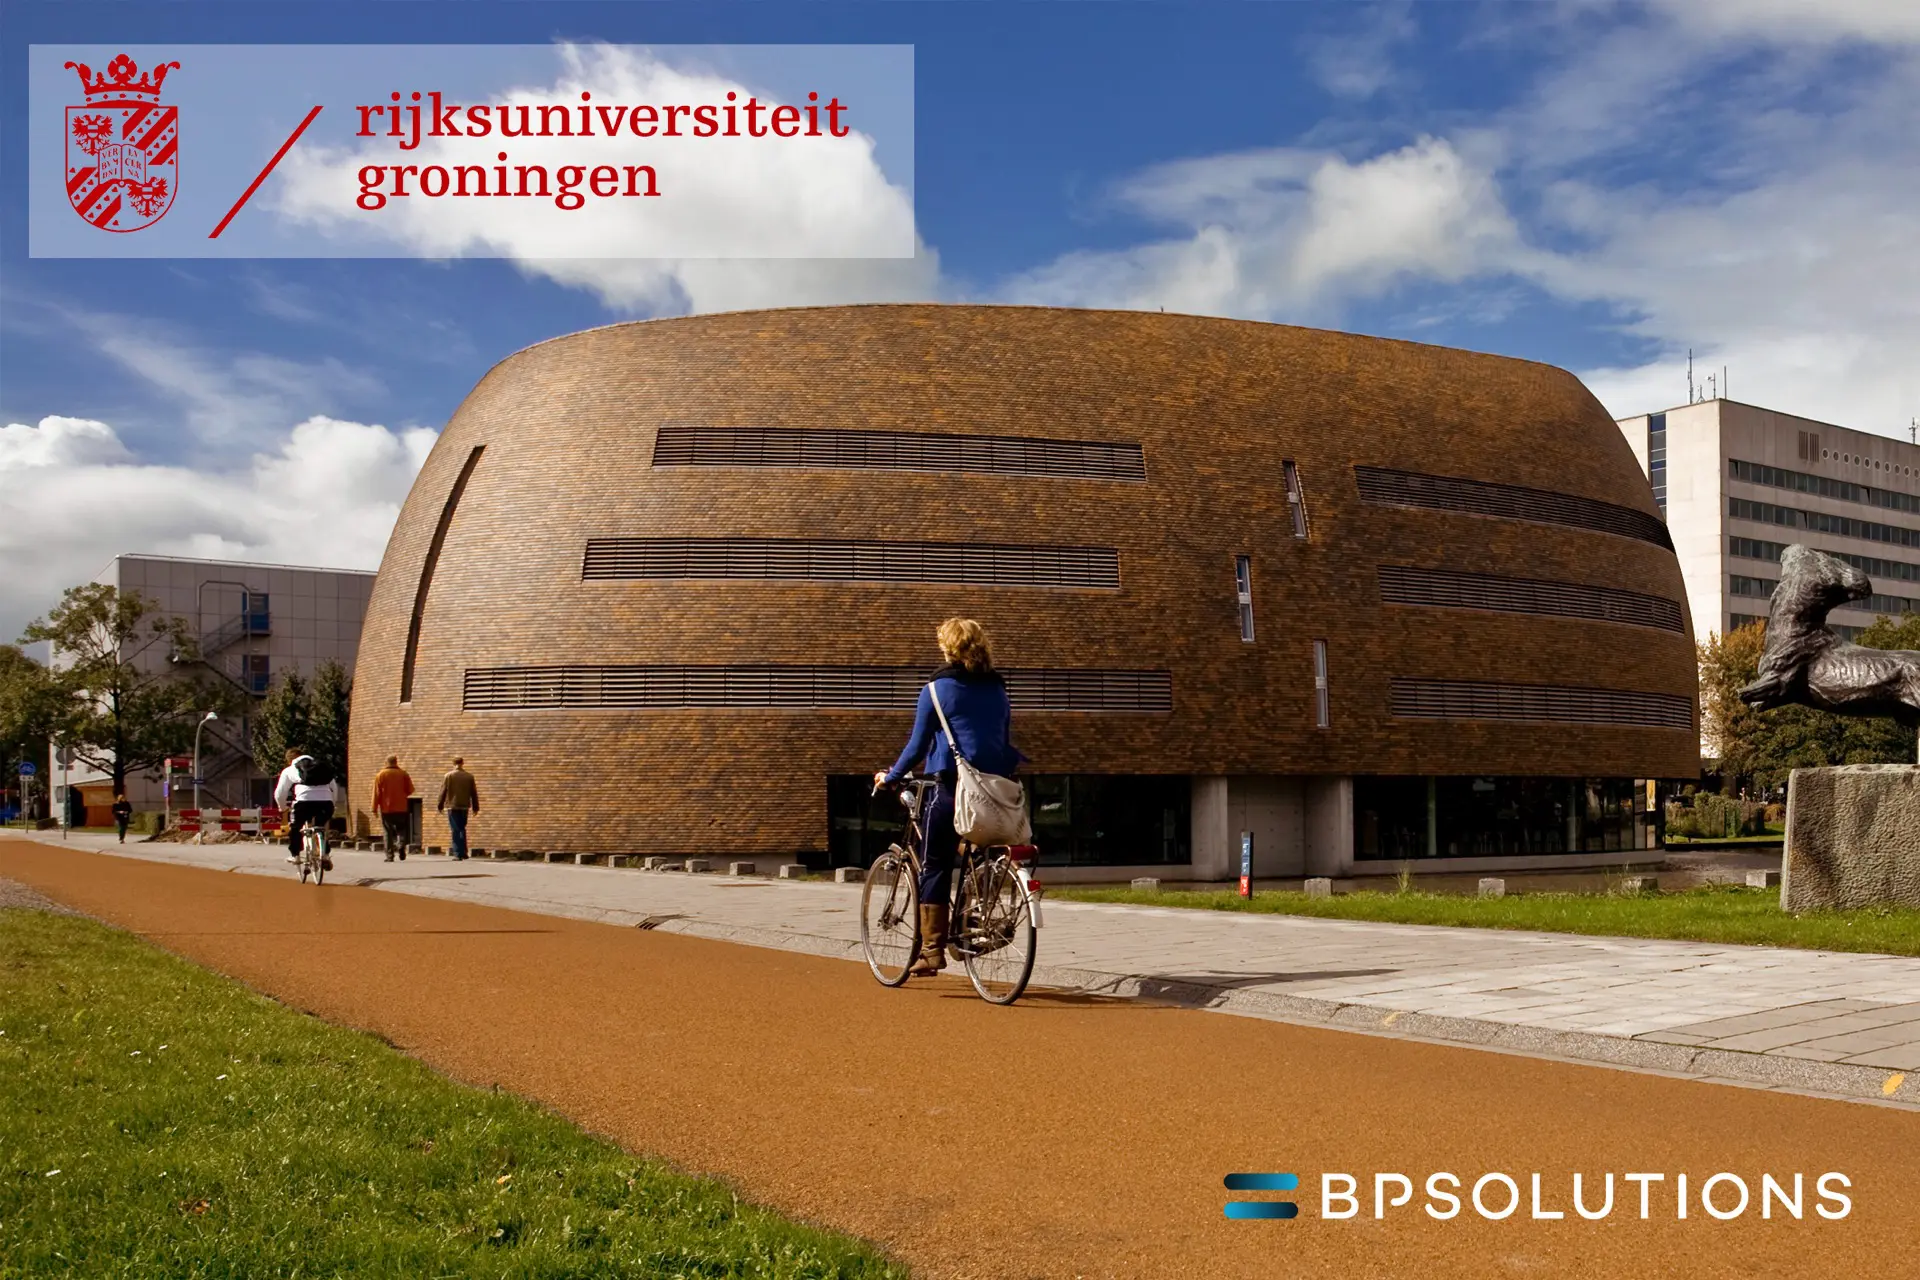 University of Groningen implements future-proof data protection